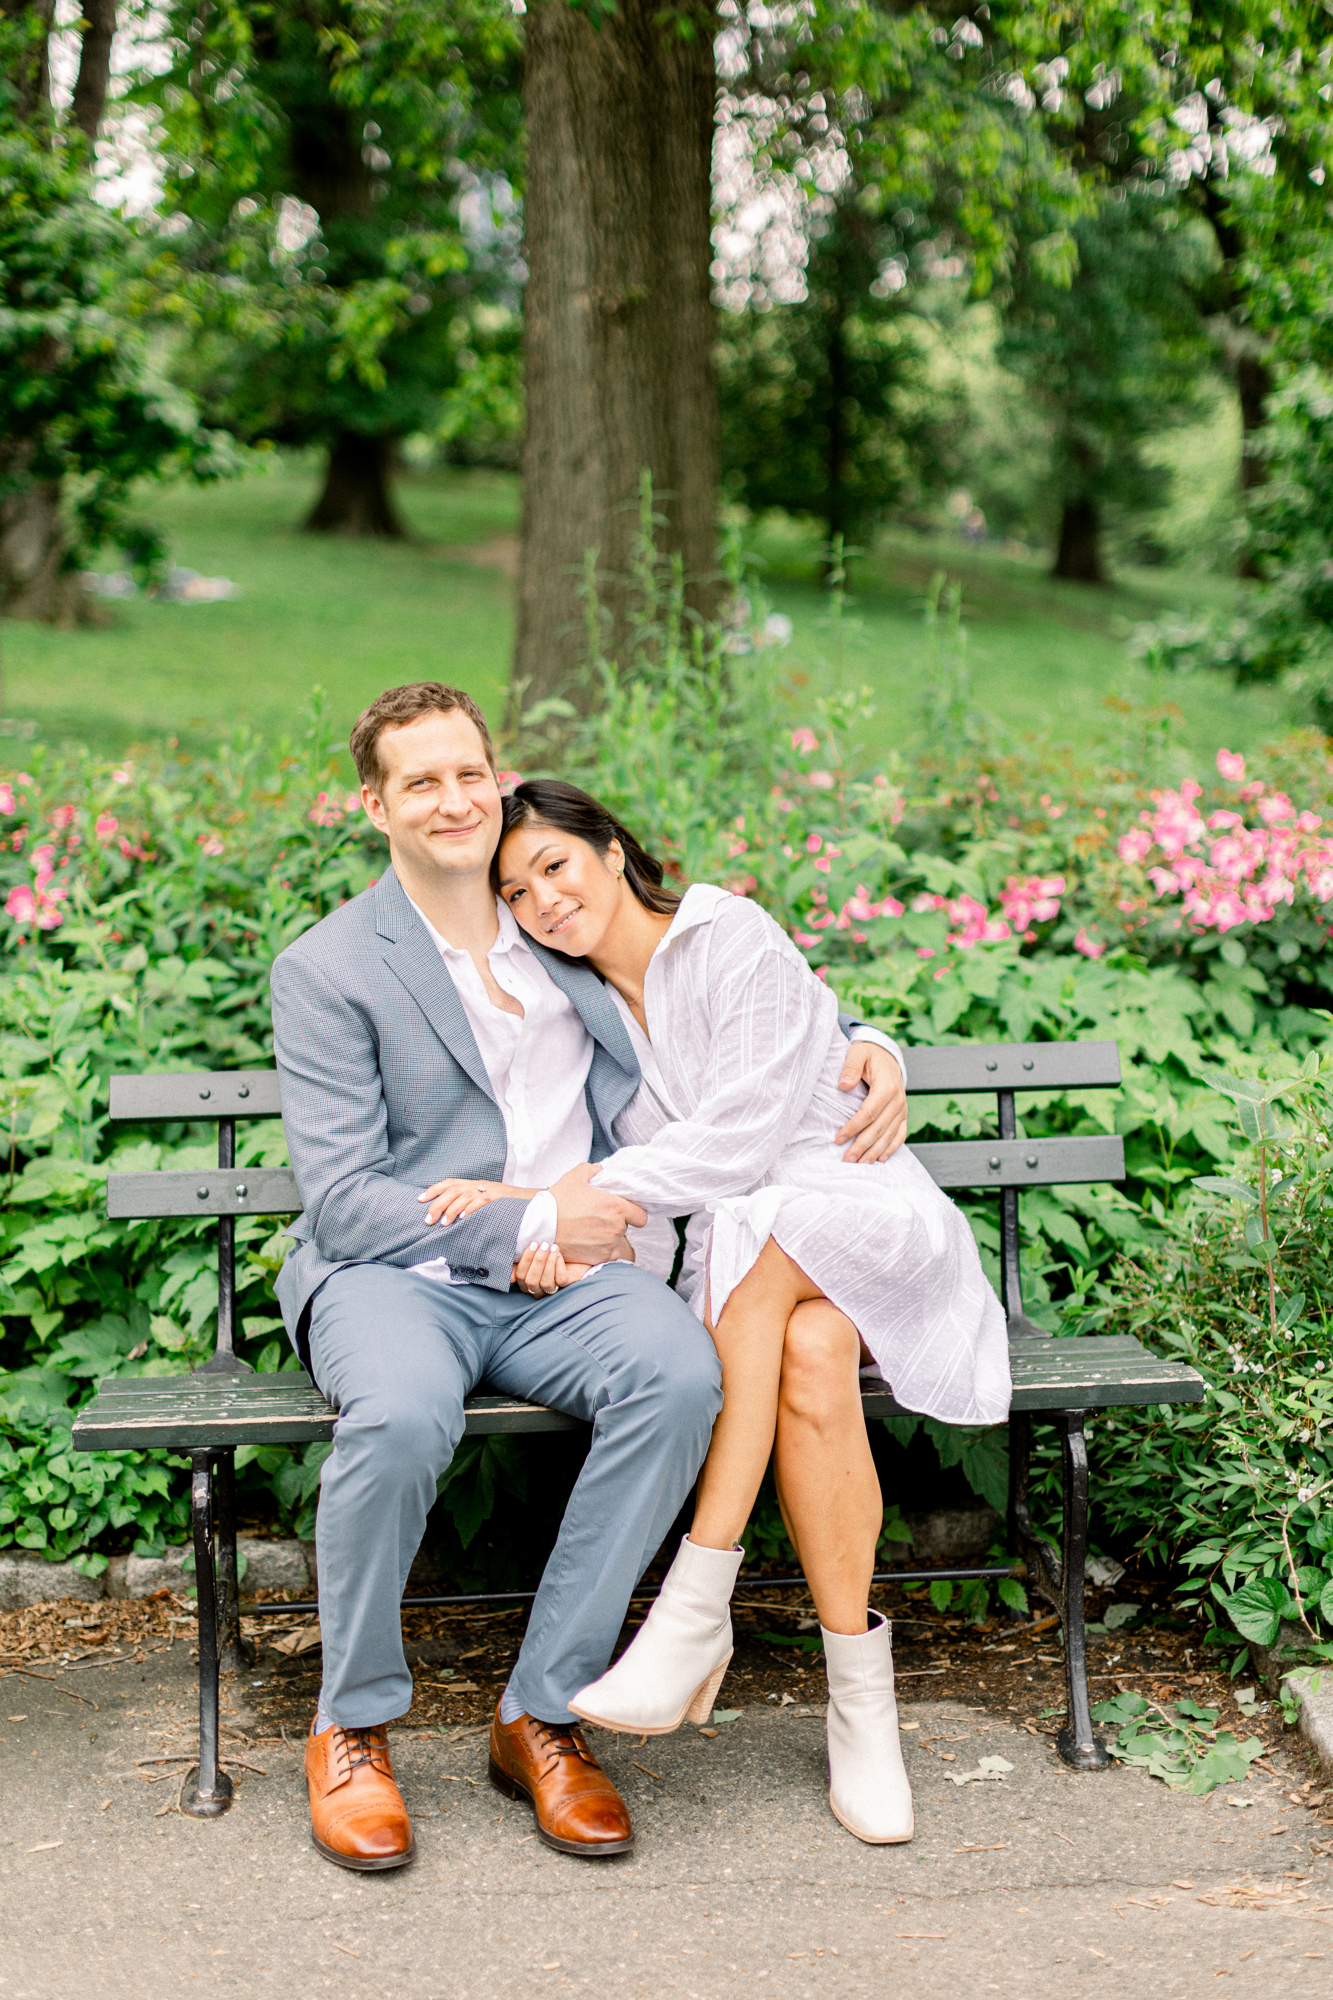 Radiant Central Park Rowboat Engagement Photography in New York